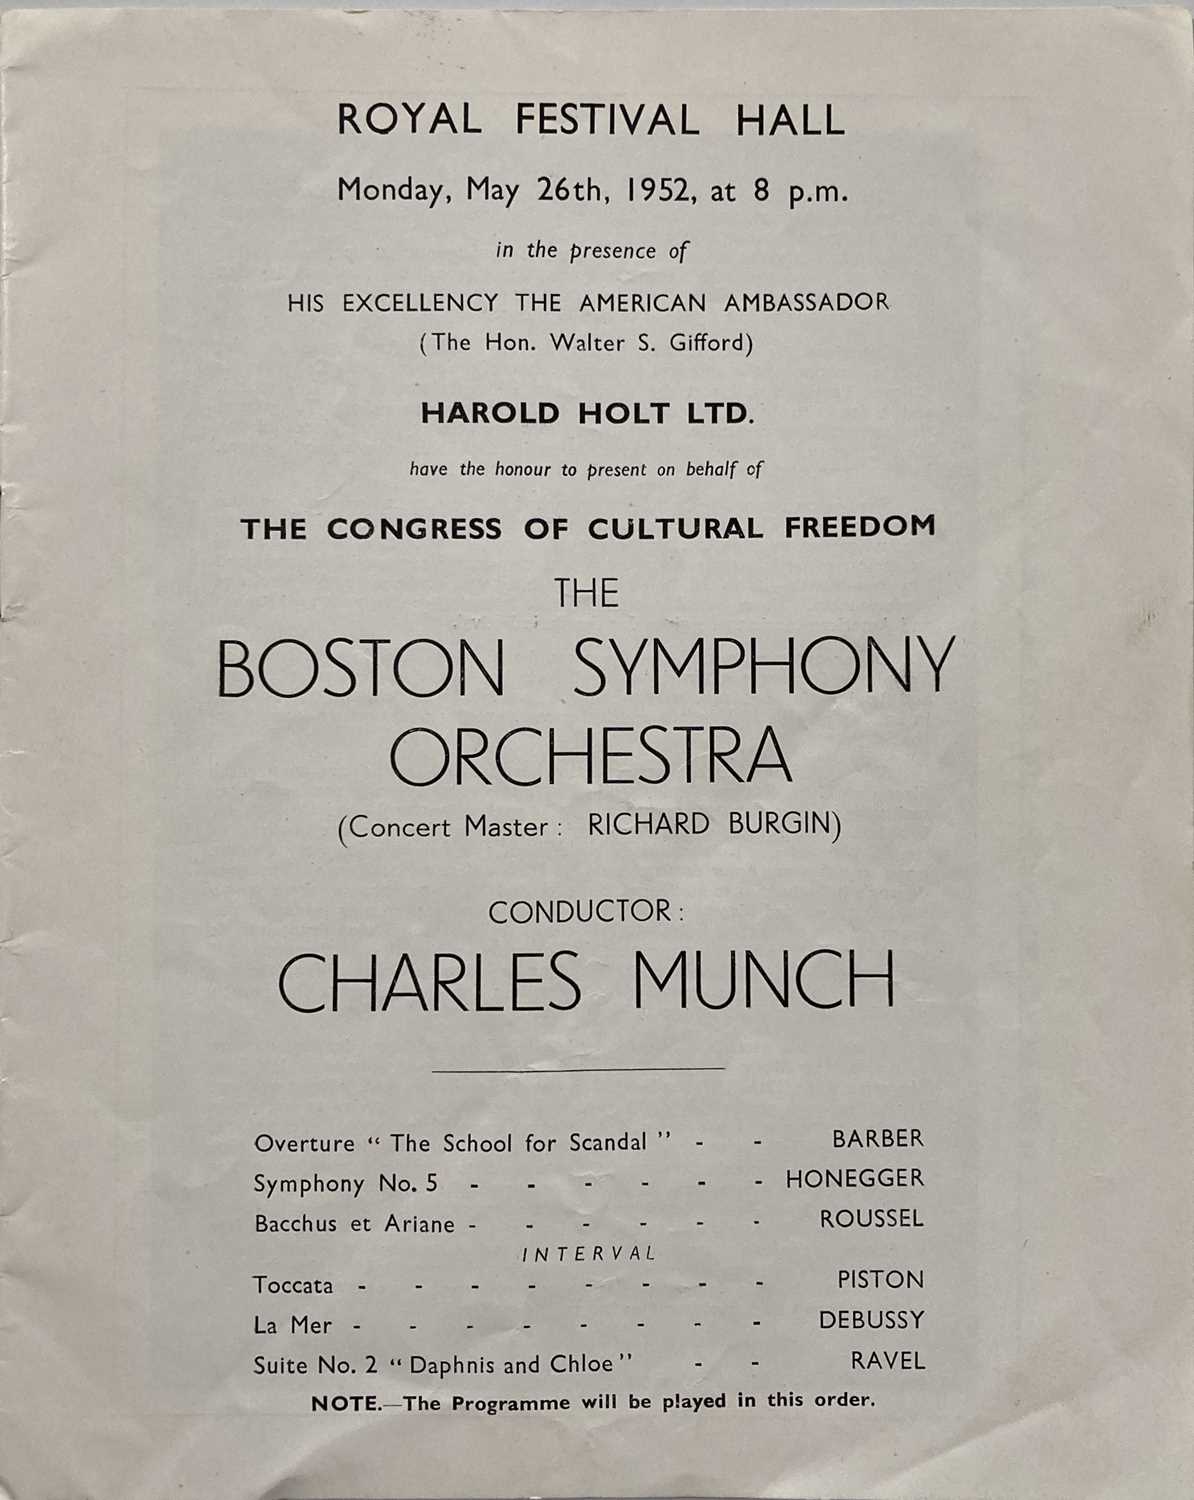 CLASSICAL MUSIC - INTERNATIONAL ORCHESTRAS - CONCERT PROGRAMMES / POSTERS - Image 11 of 15